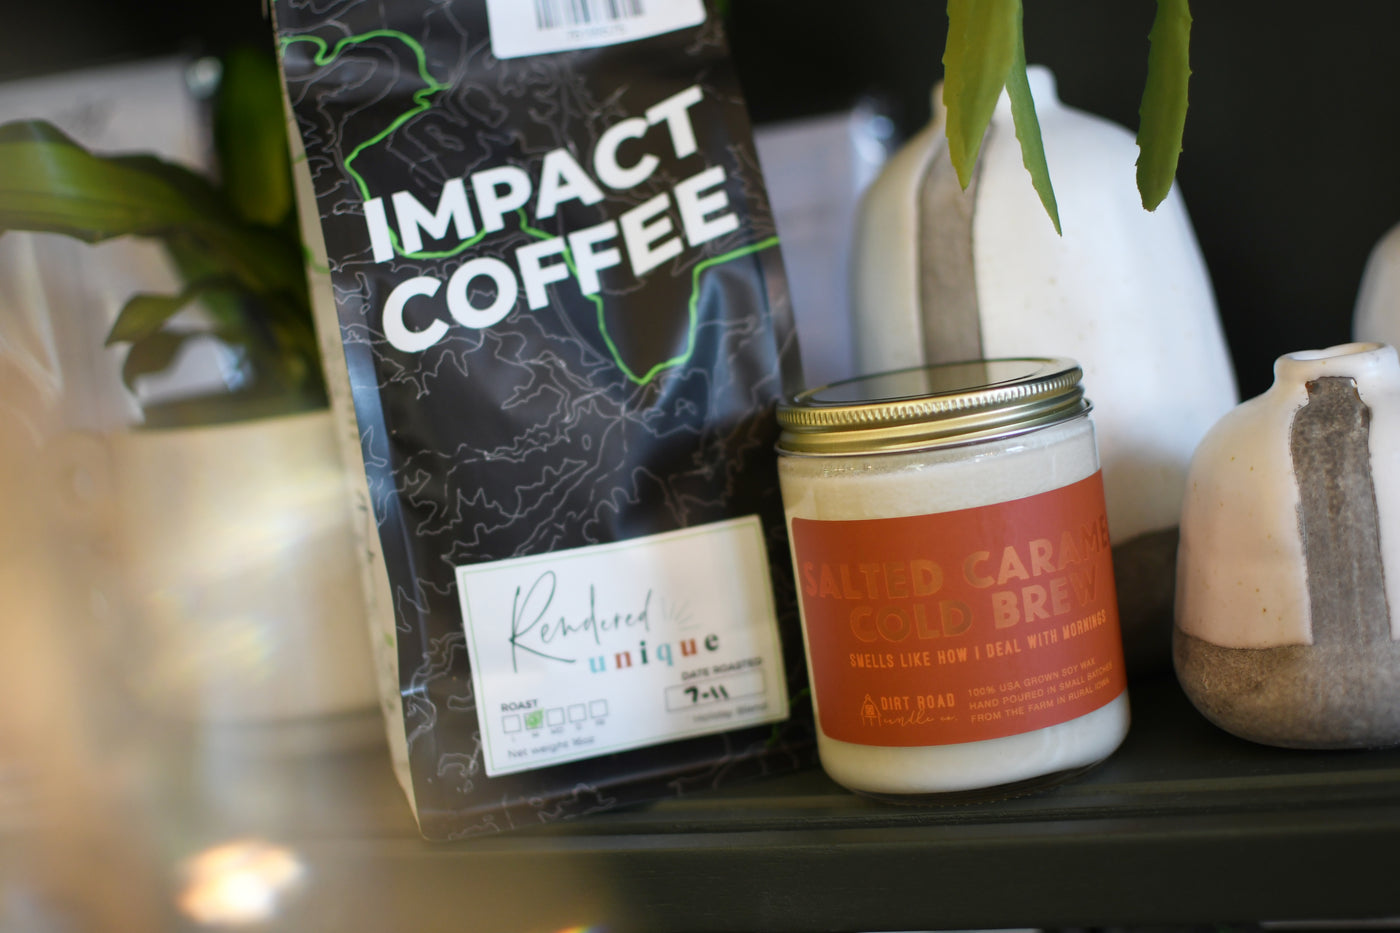 Rendered Unique Special Blend by Impact Coffee-1 lb